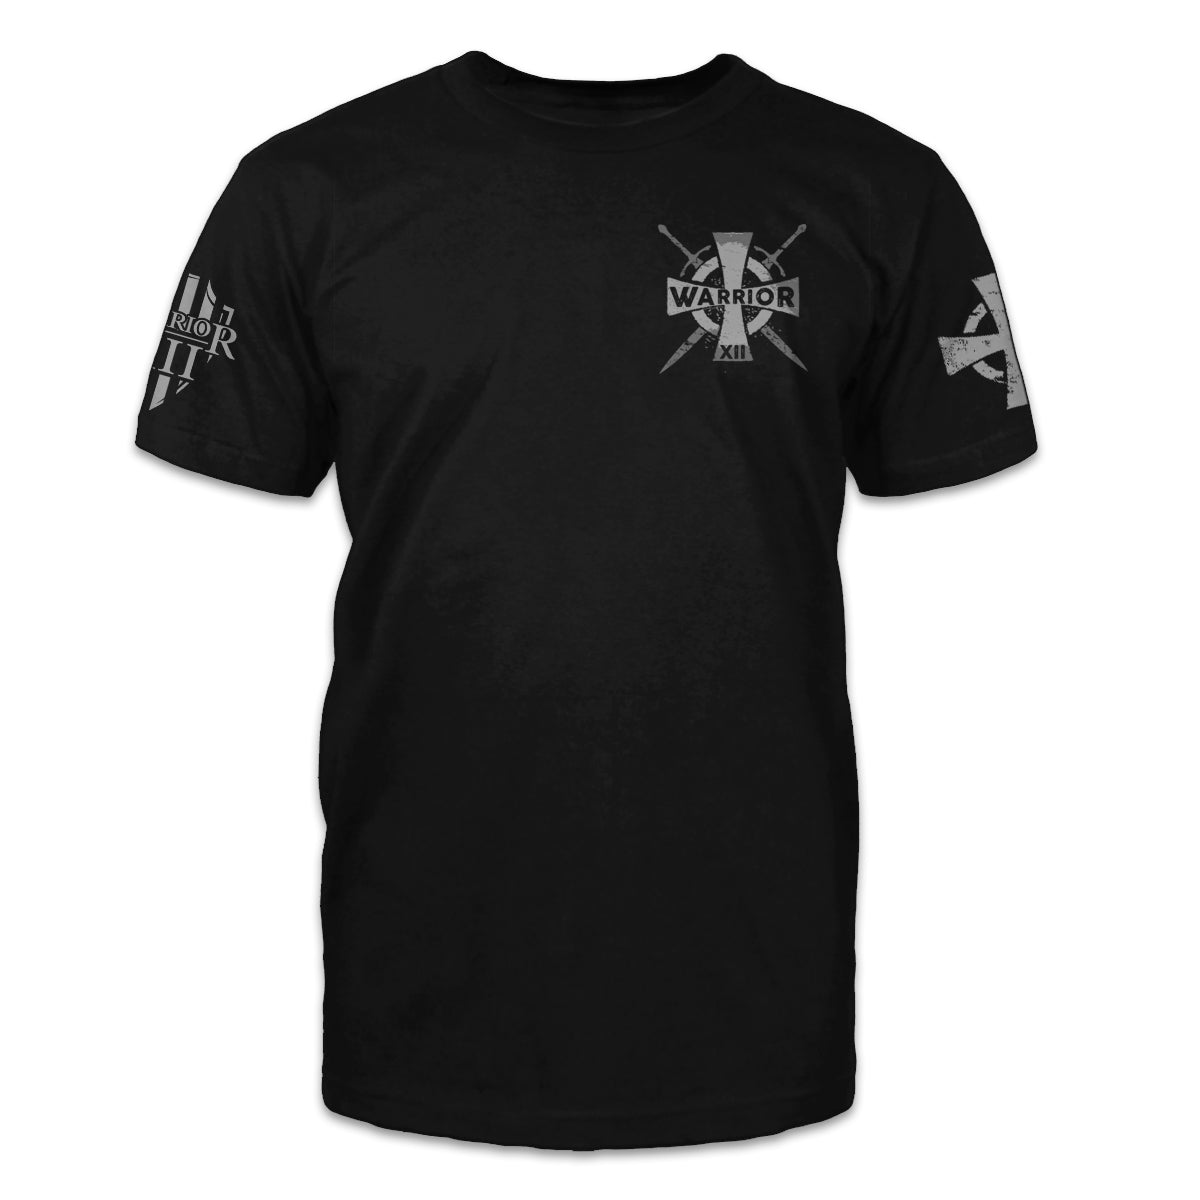 A black t-shirt with a templar cross printed on the front of the shirt.